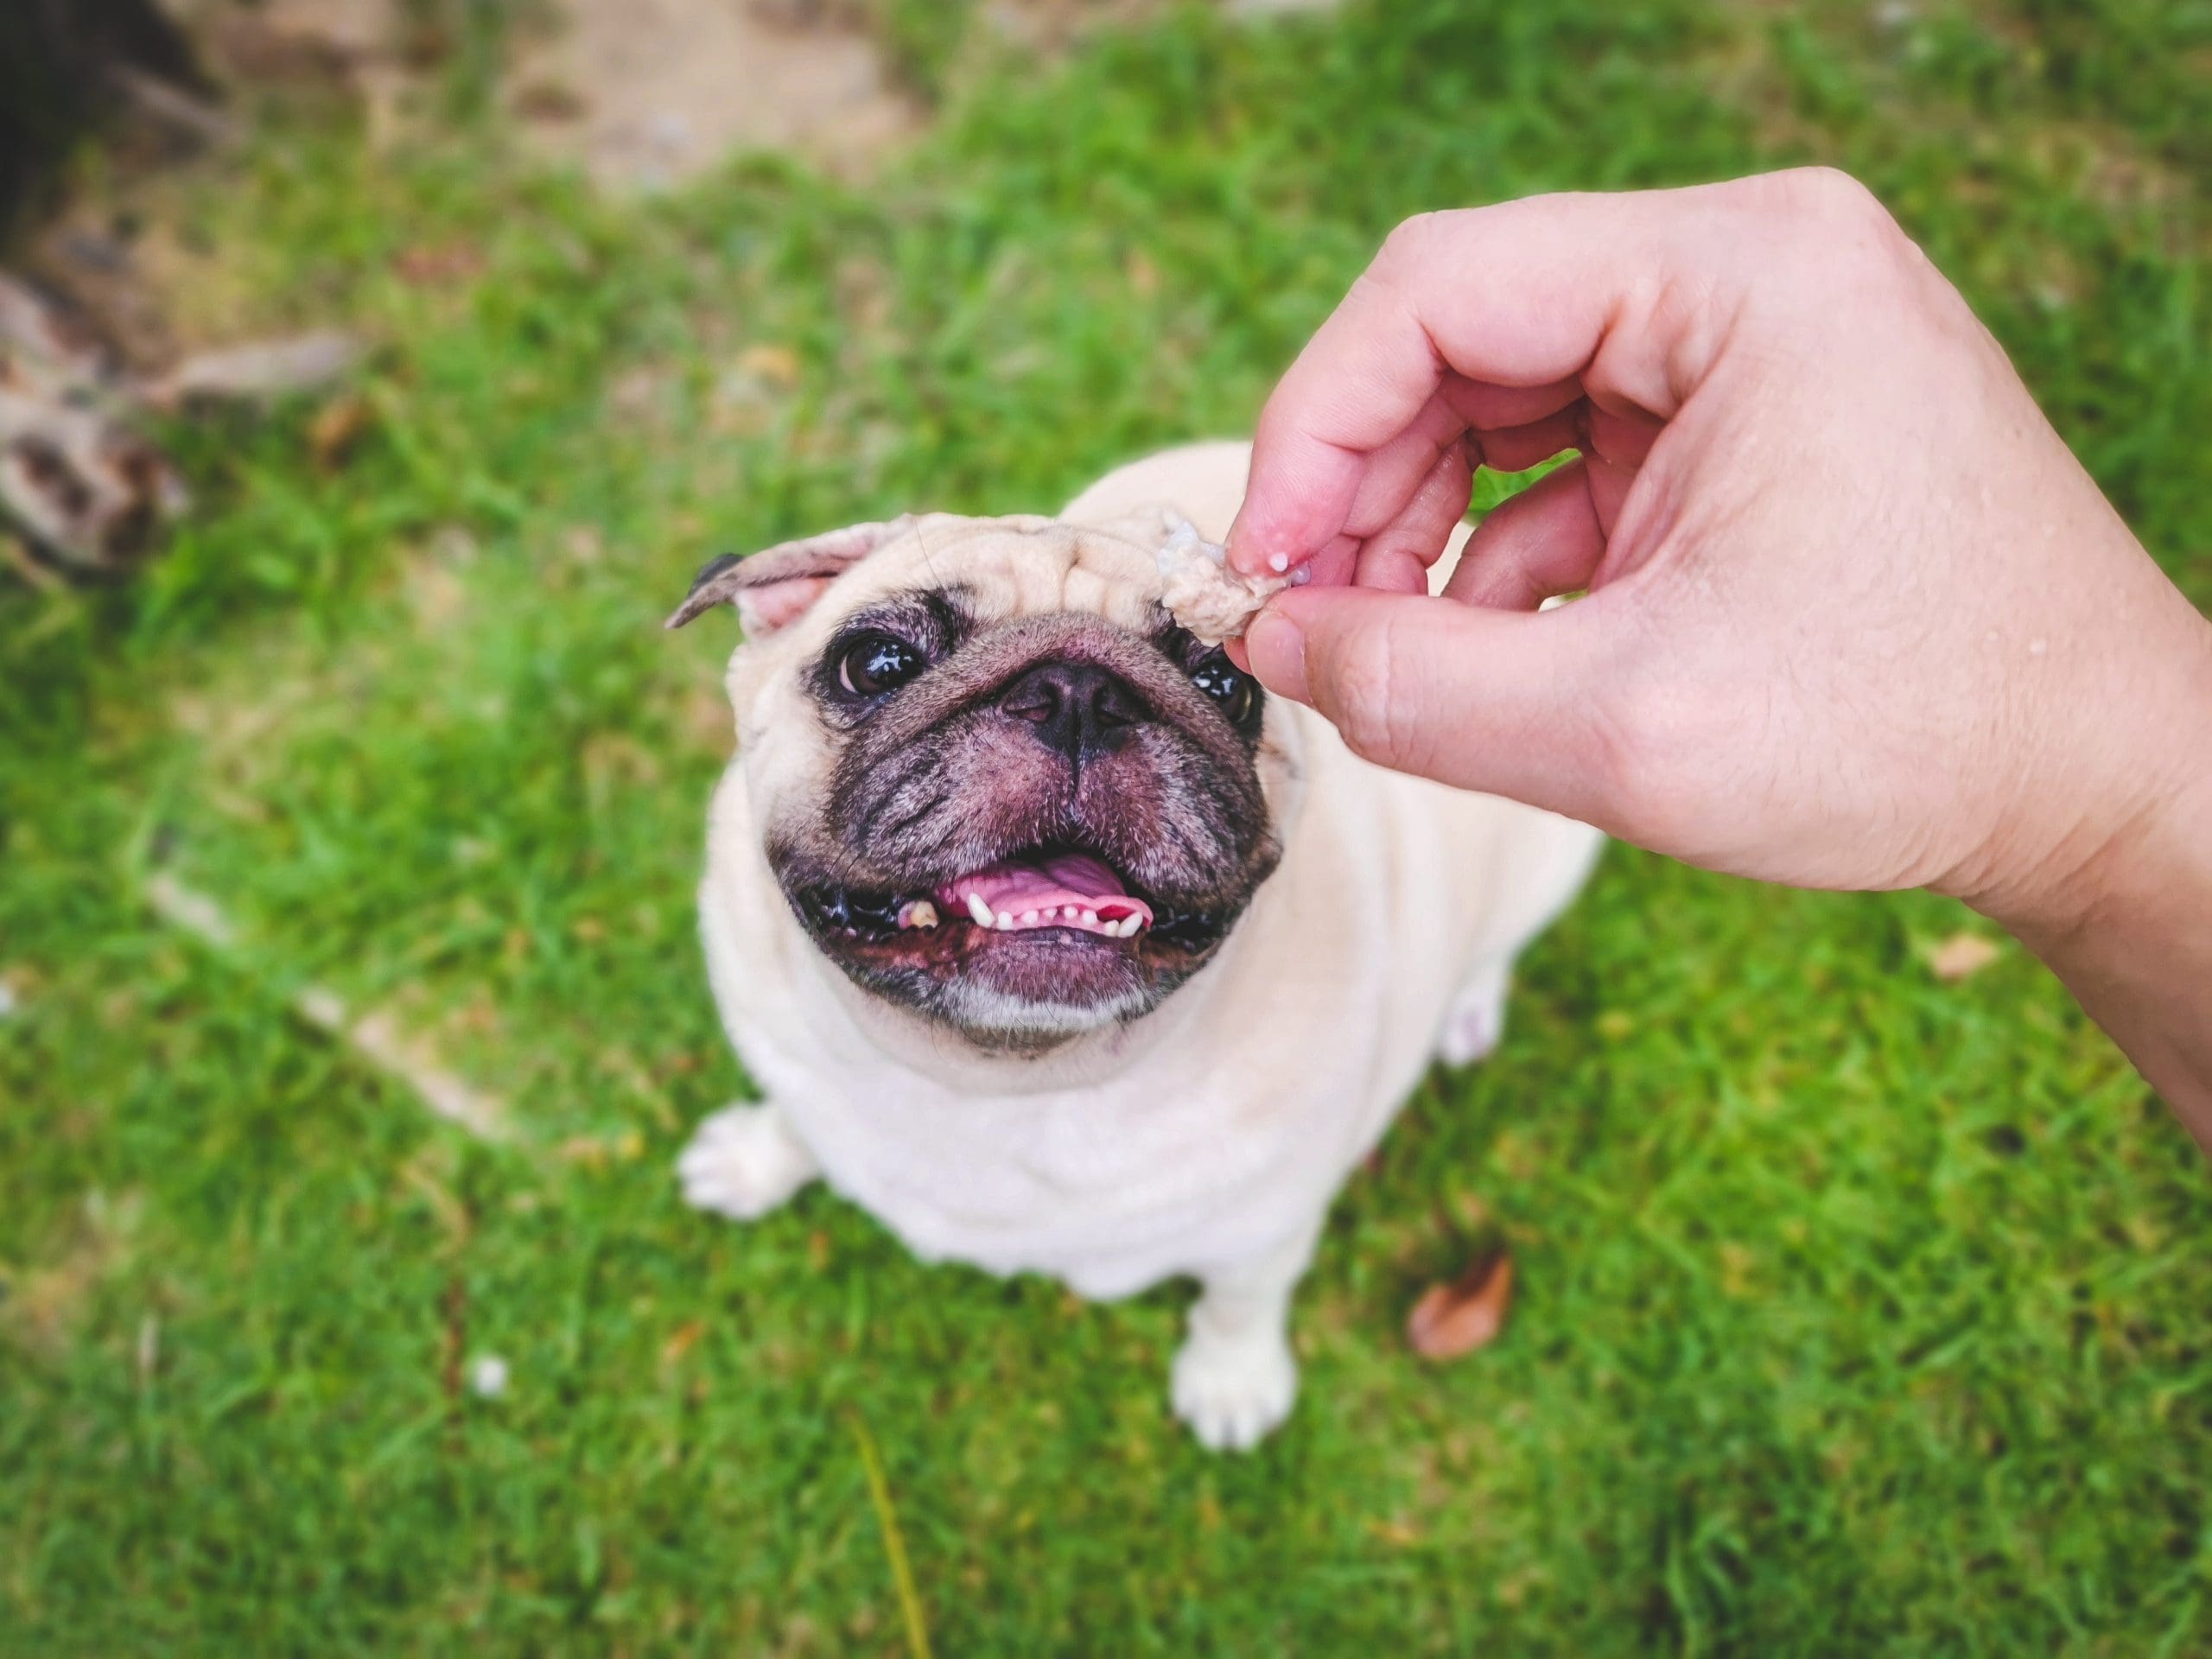 Pug dog with a funny face takes a treat for good behavior from the owner. A cute pug at a local park.